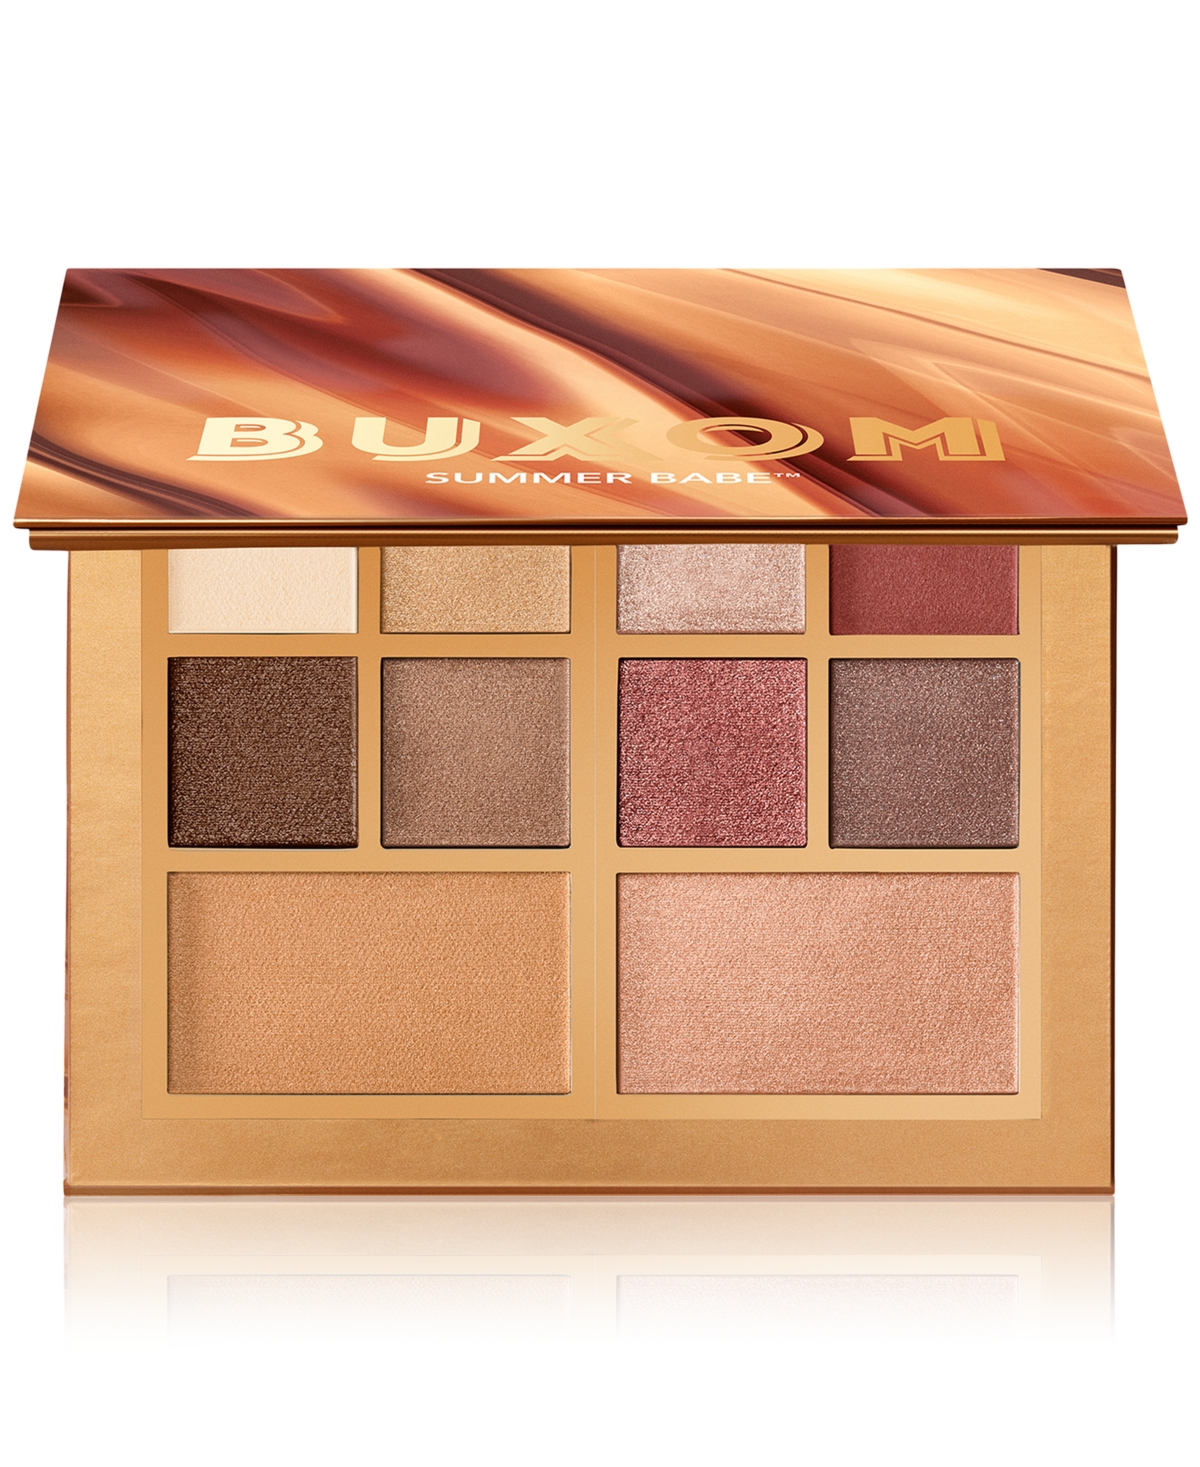 Buxom Cosmetics Summer Babe All-Over Bronze Palette